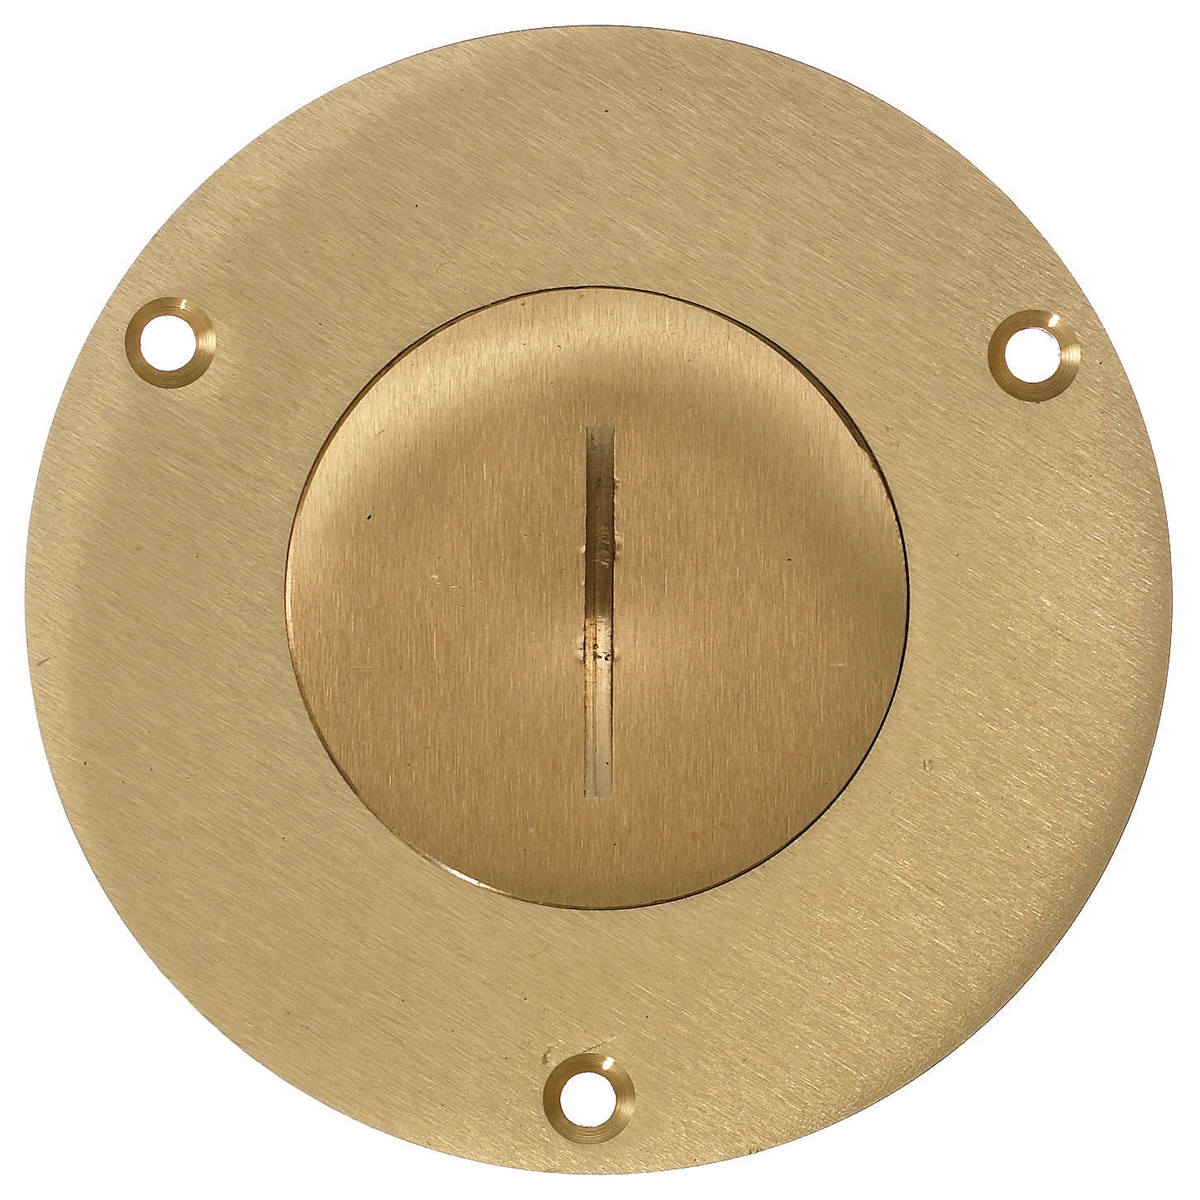 1-Gang Cover, Round, Terrazzo Floors, 2-1/8 Threaded Opening, Brass, S3325